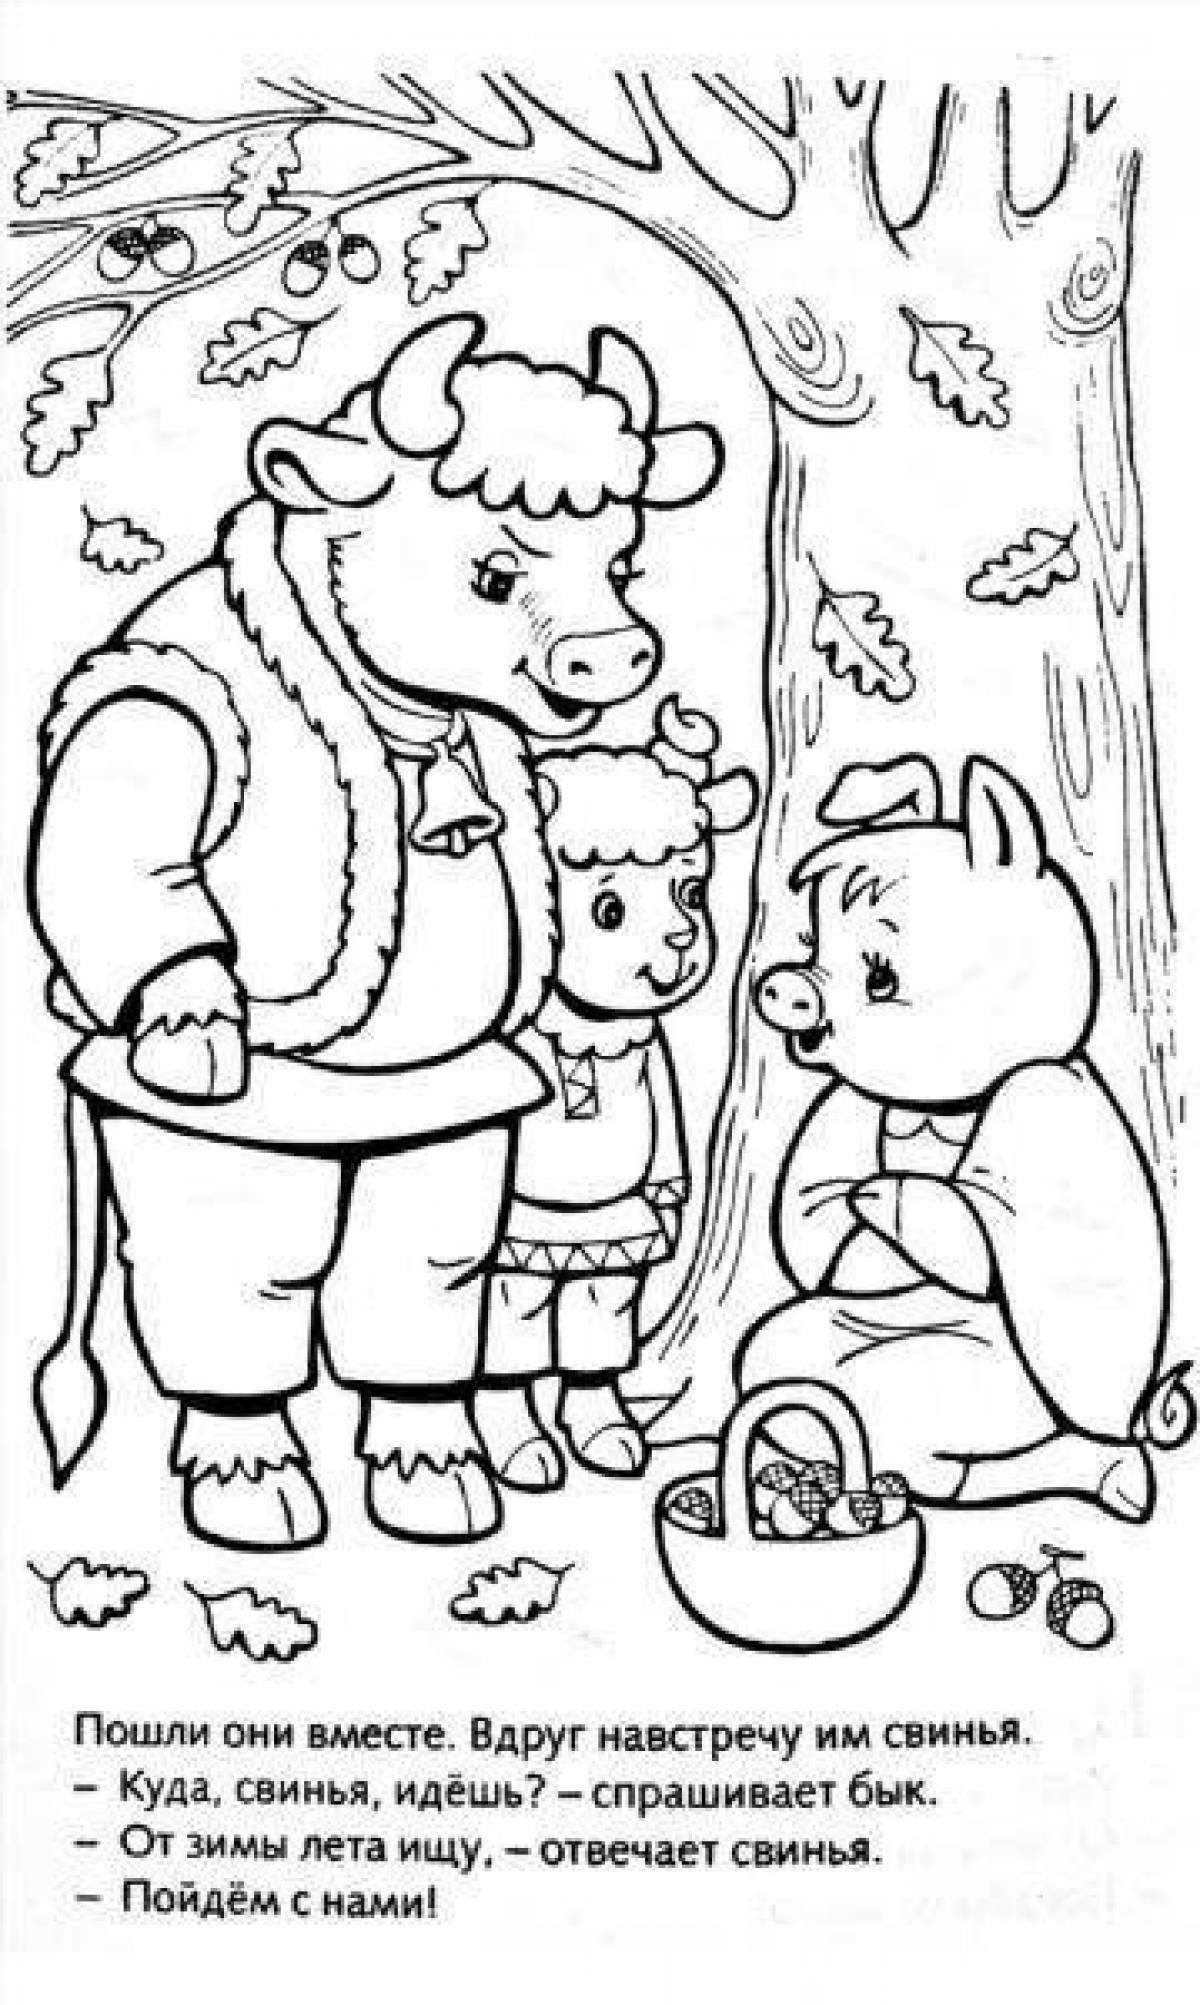 Shiny winter hut coloring book for kids